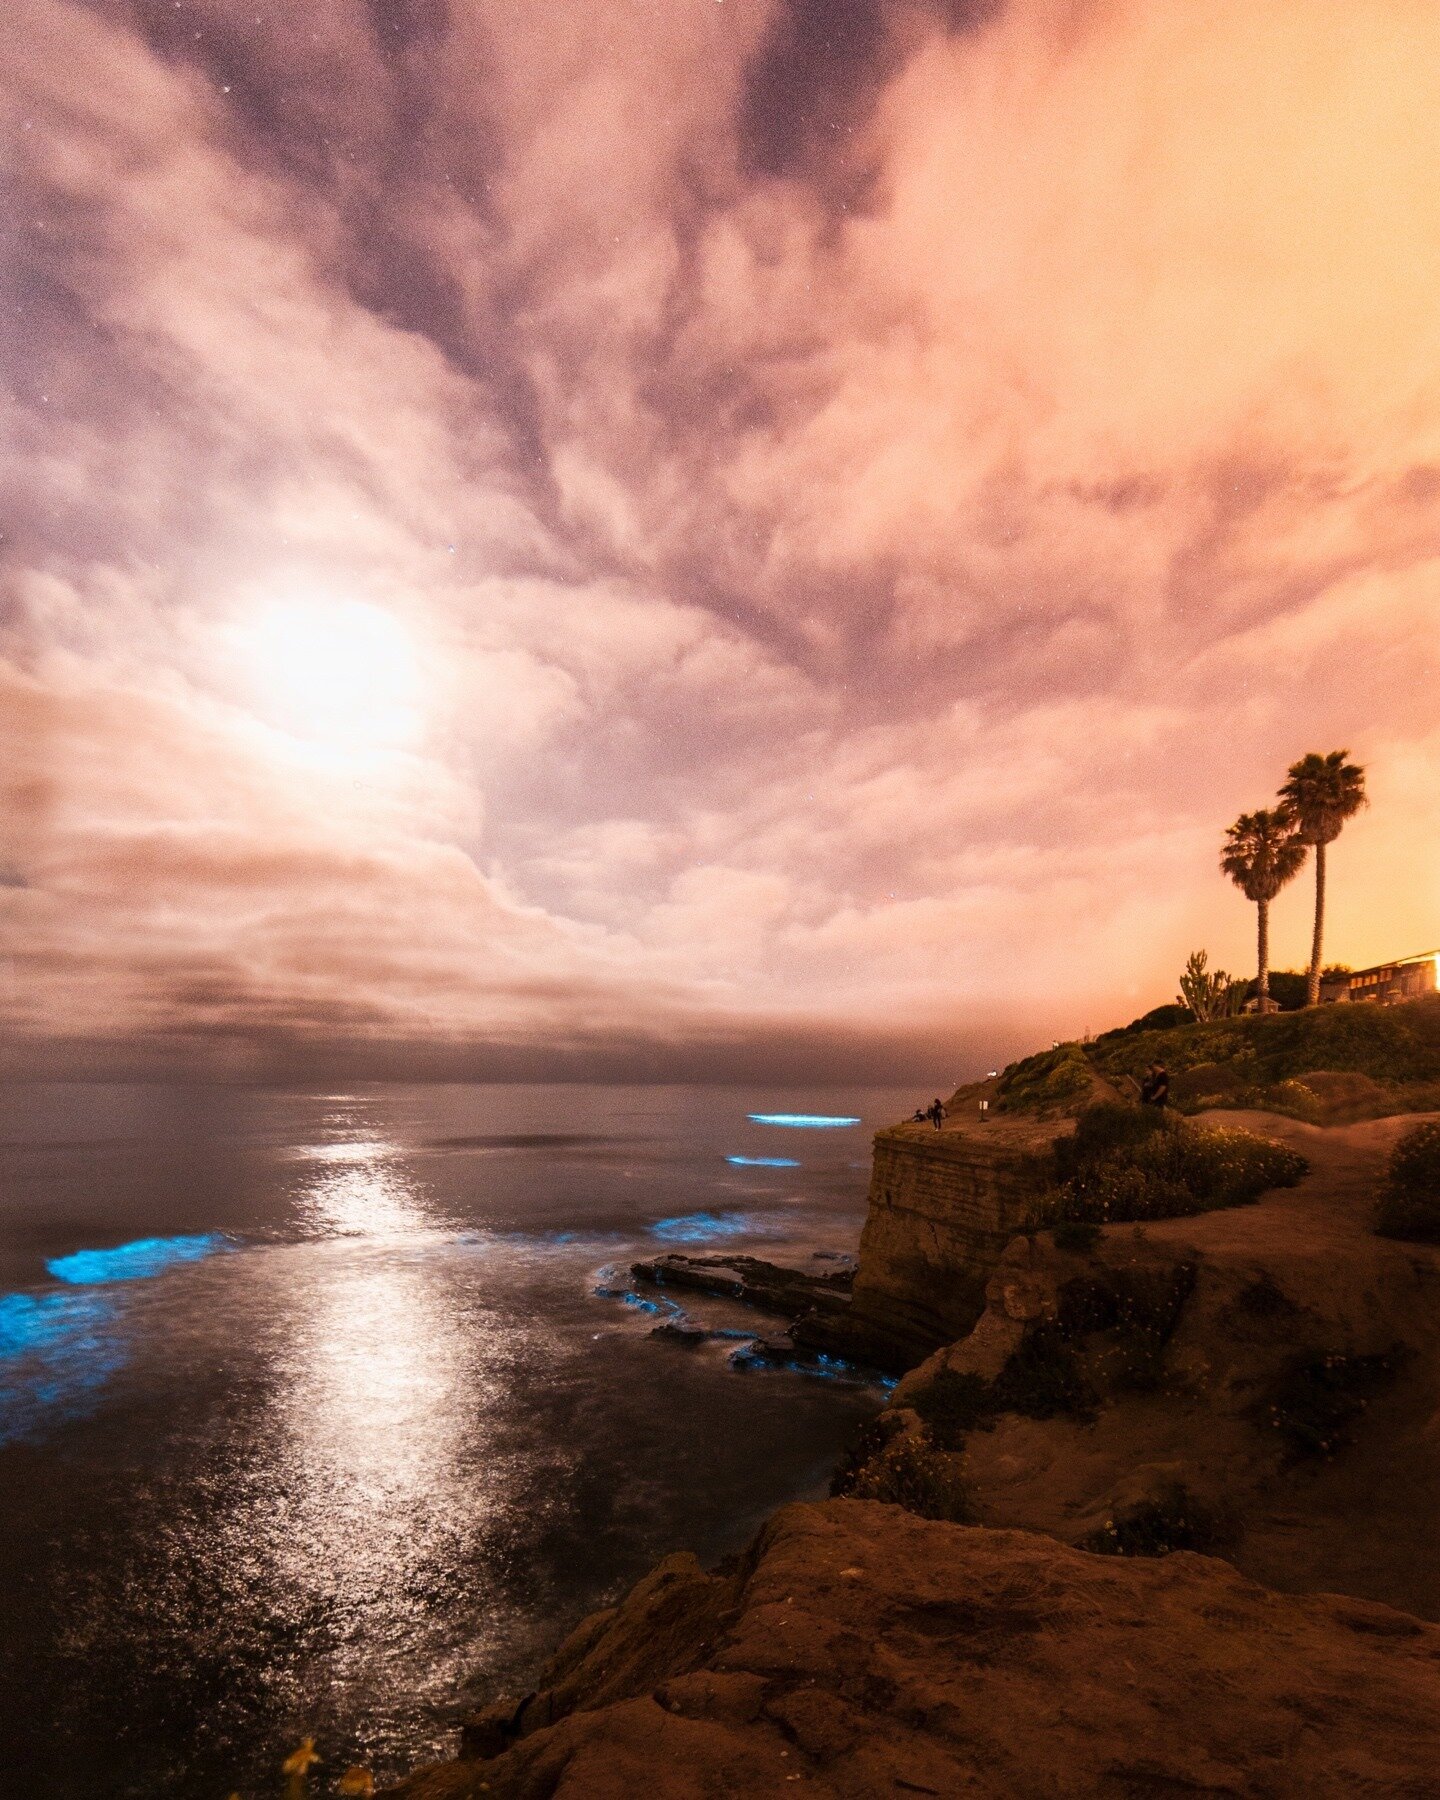 Late last March we got the call that the bioluminescent algae had resurfaced on the shores of San Diego. That first night was a spring tide, when high tide is at its peak in the lunar cycle, and we made our way to the sand to splash in the sparkling 